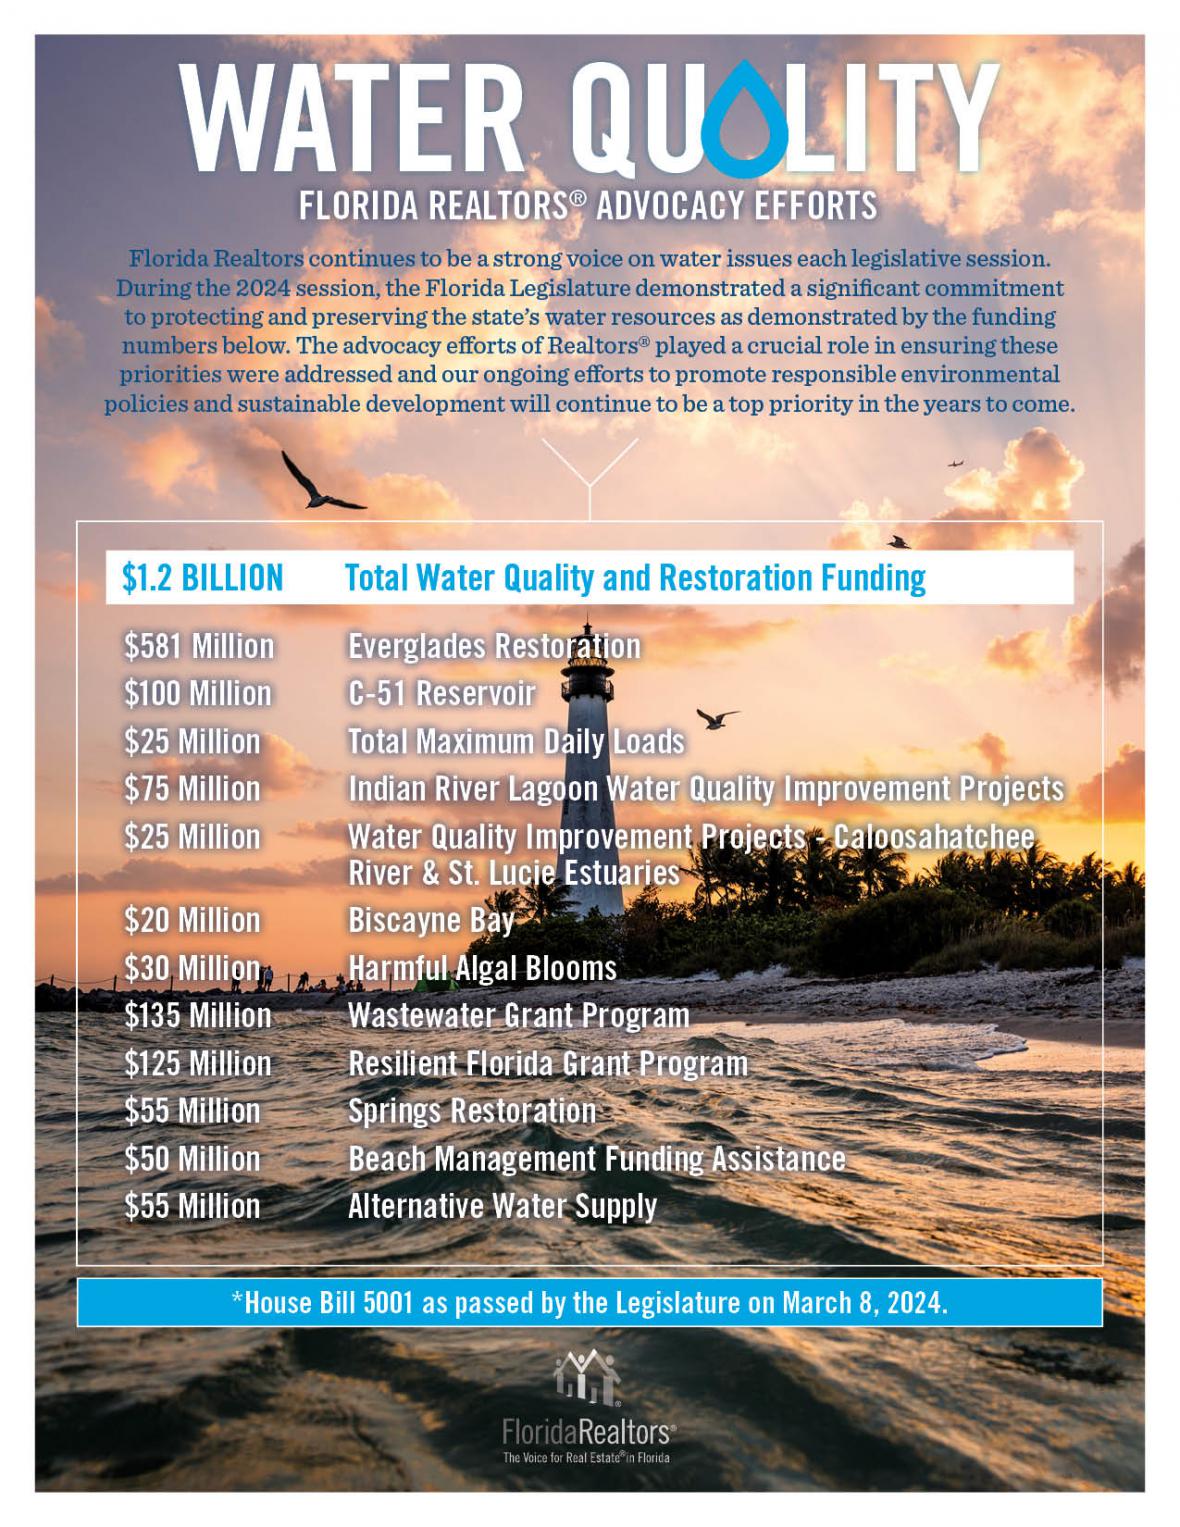 Florida Realtors water quality advocacy infographic